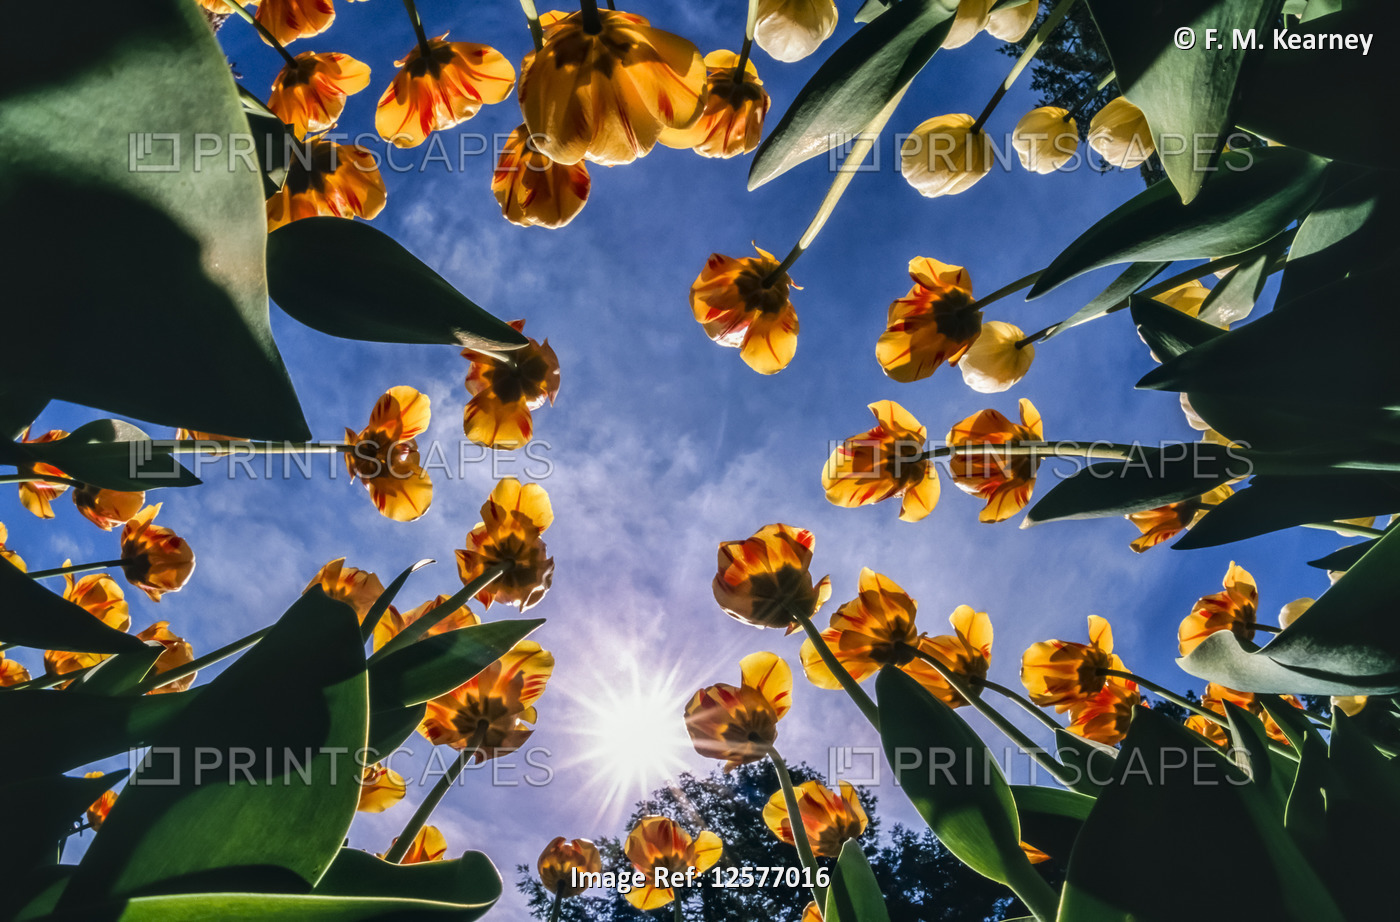 Tulip bed (Tulipa) in bloom against a blue sky with sunburst, New York ...